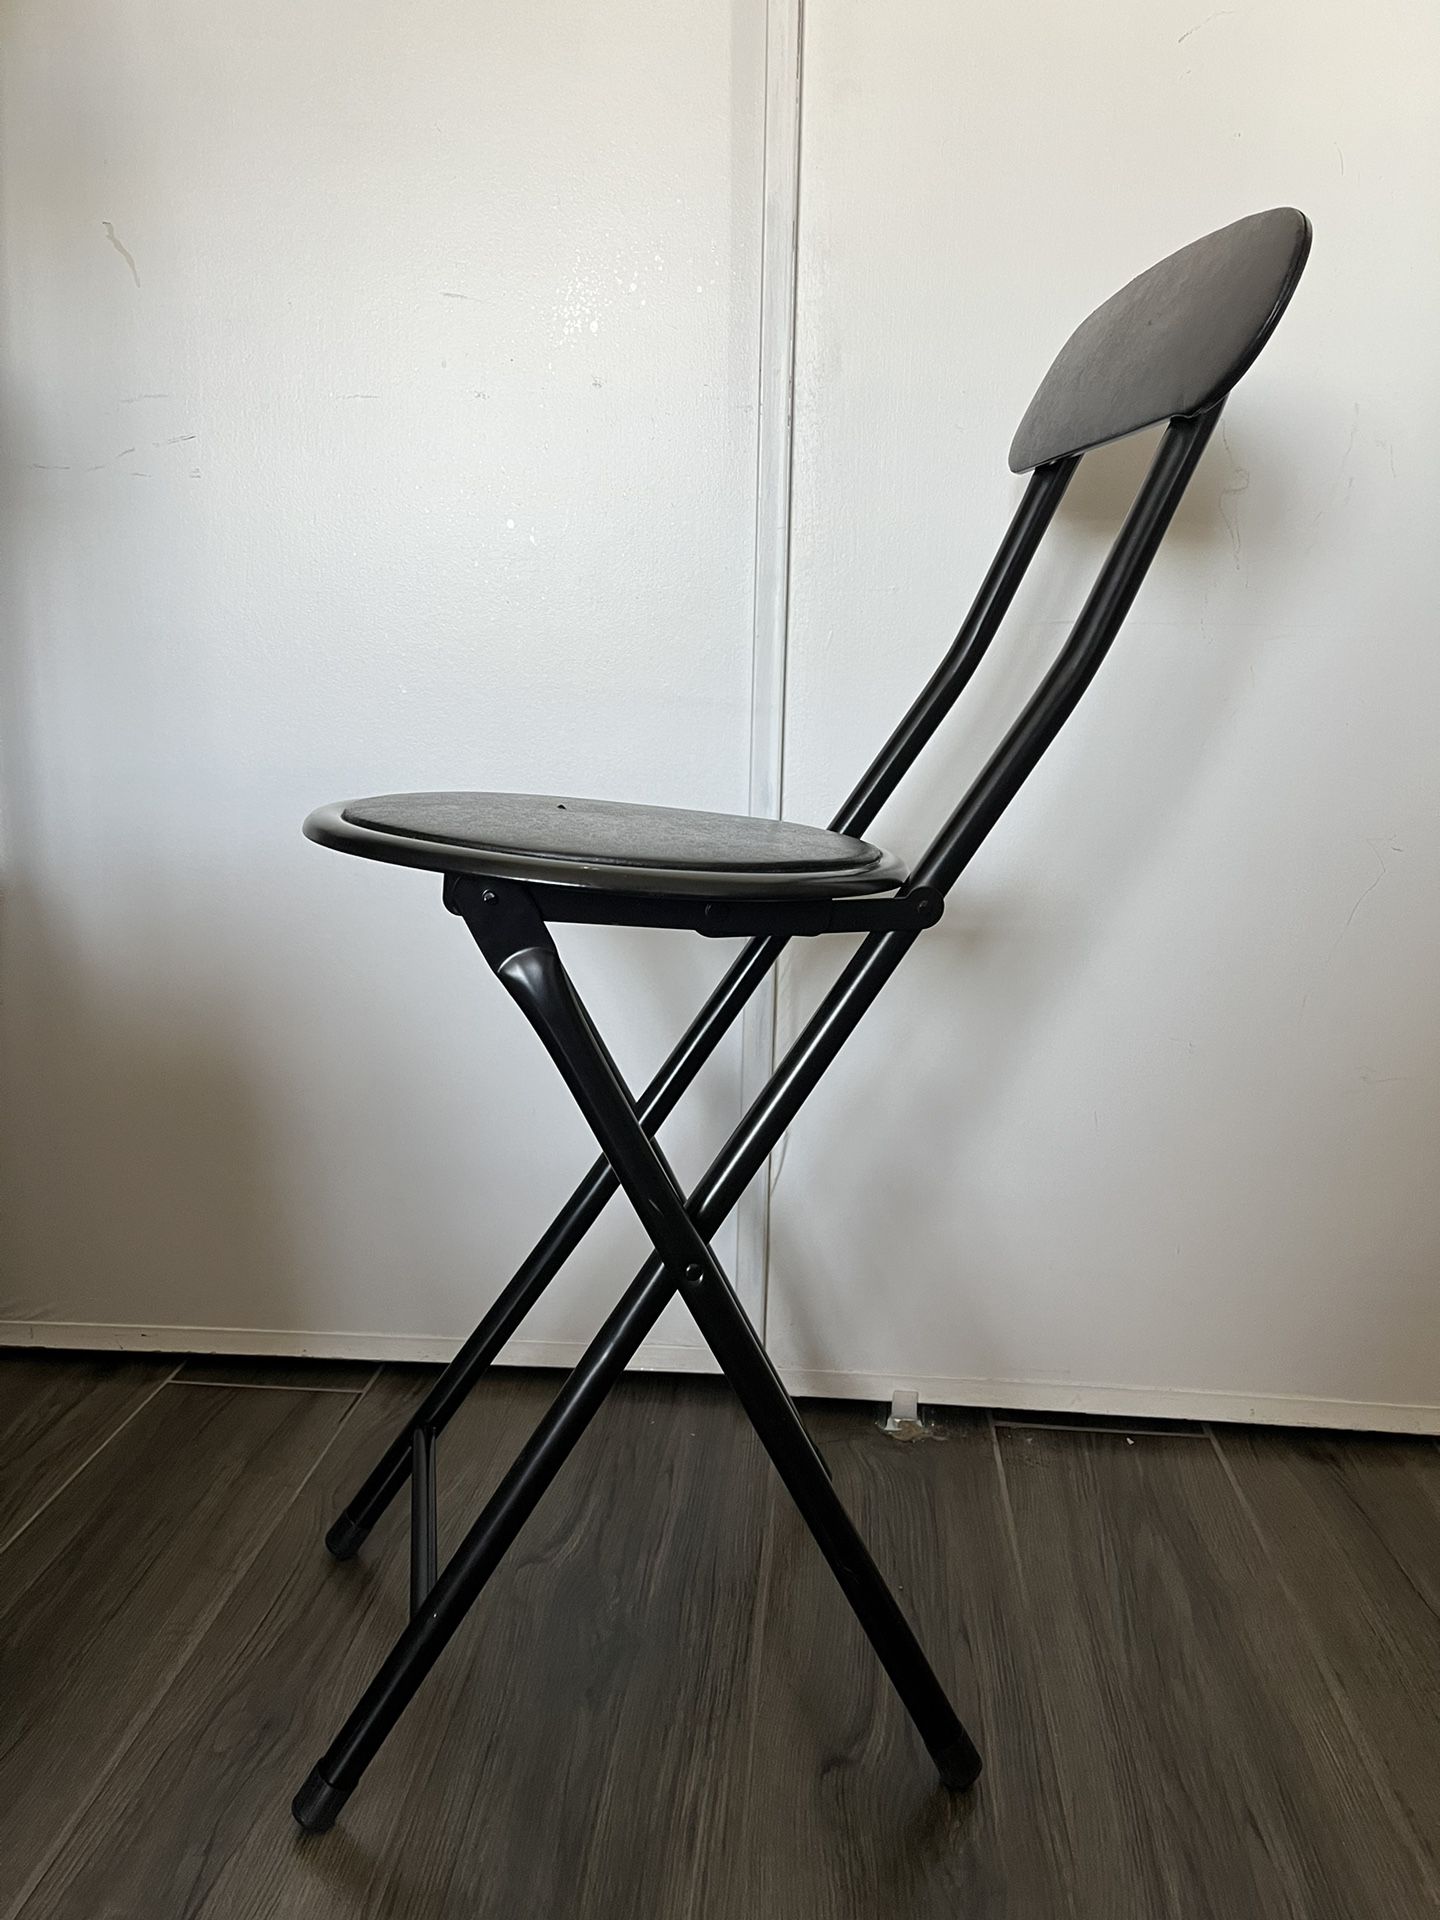 Small foldable chair